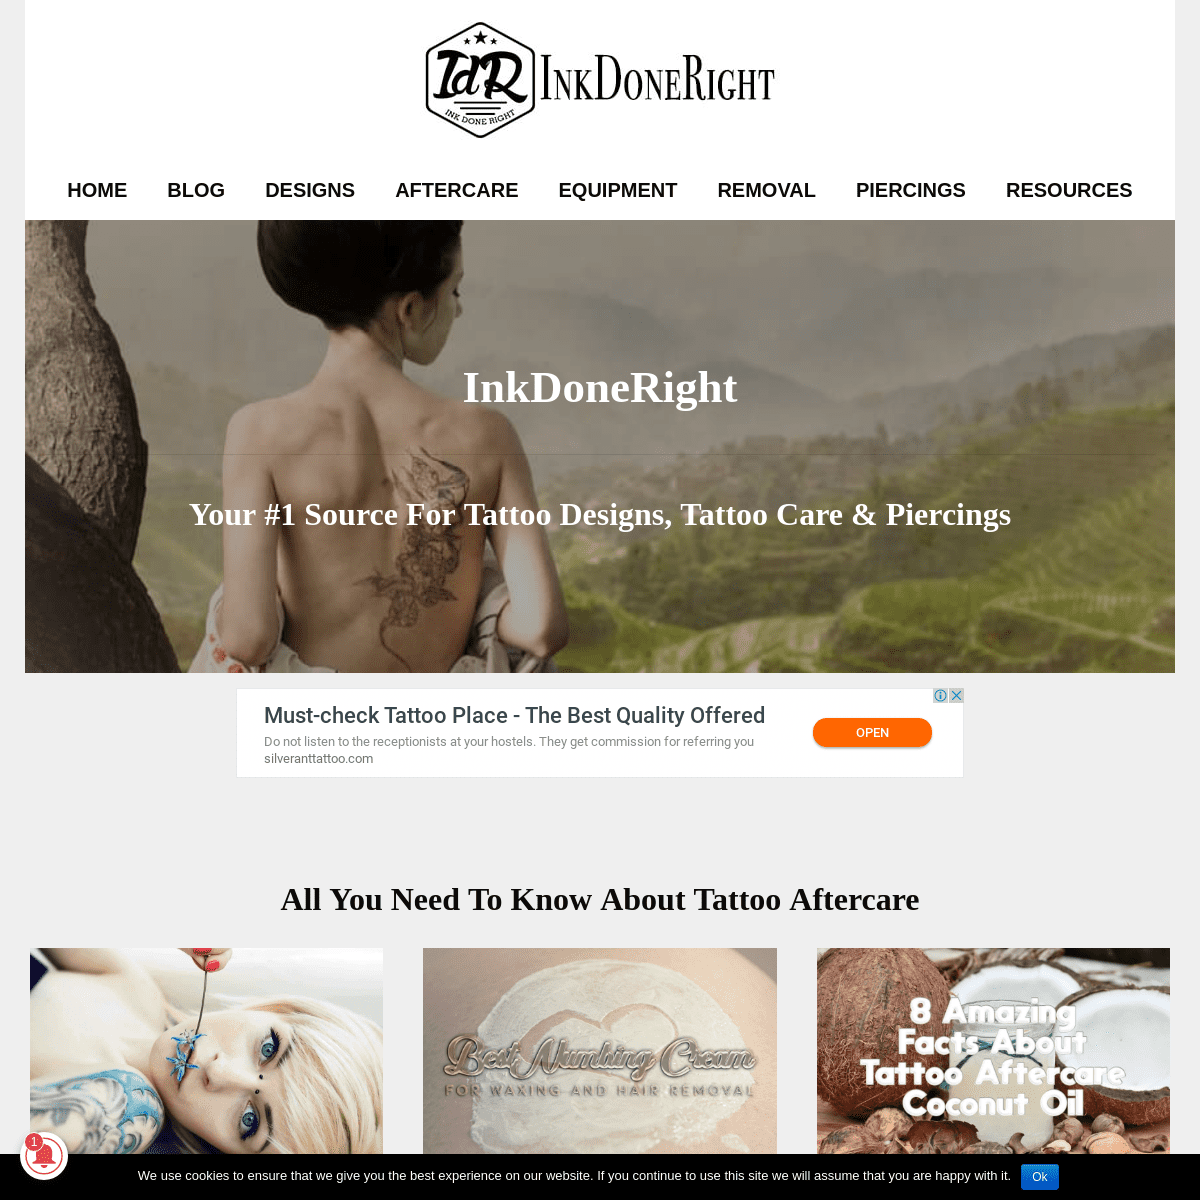 InkDoneRight - Your #1 Source for Tattoo Designs, Tattoo Care & Piercings